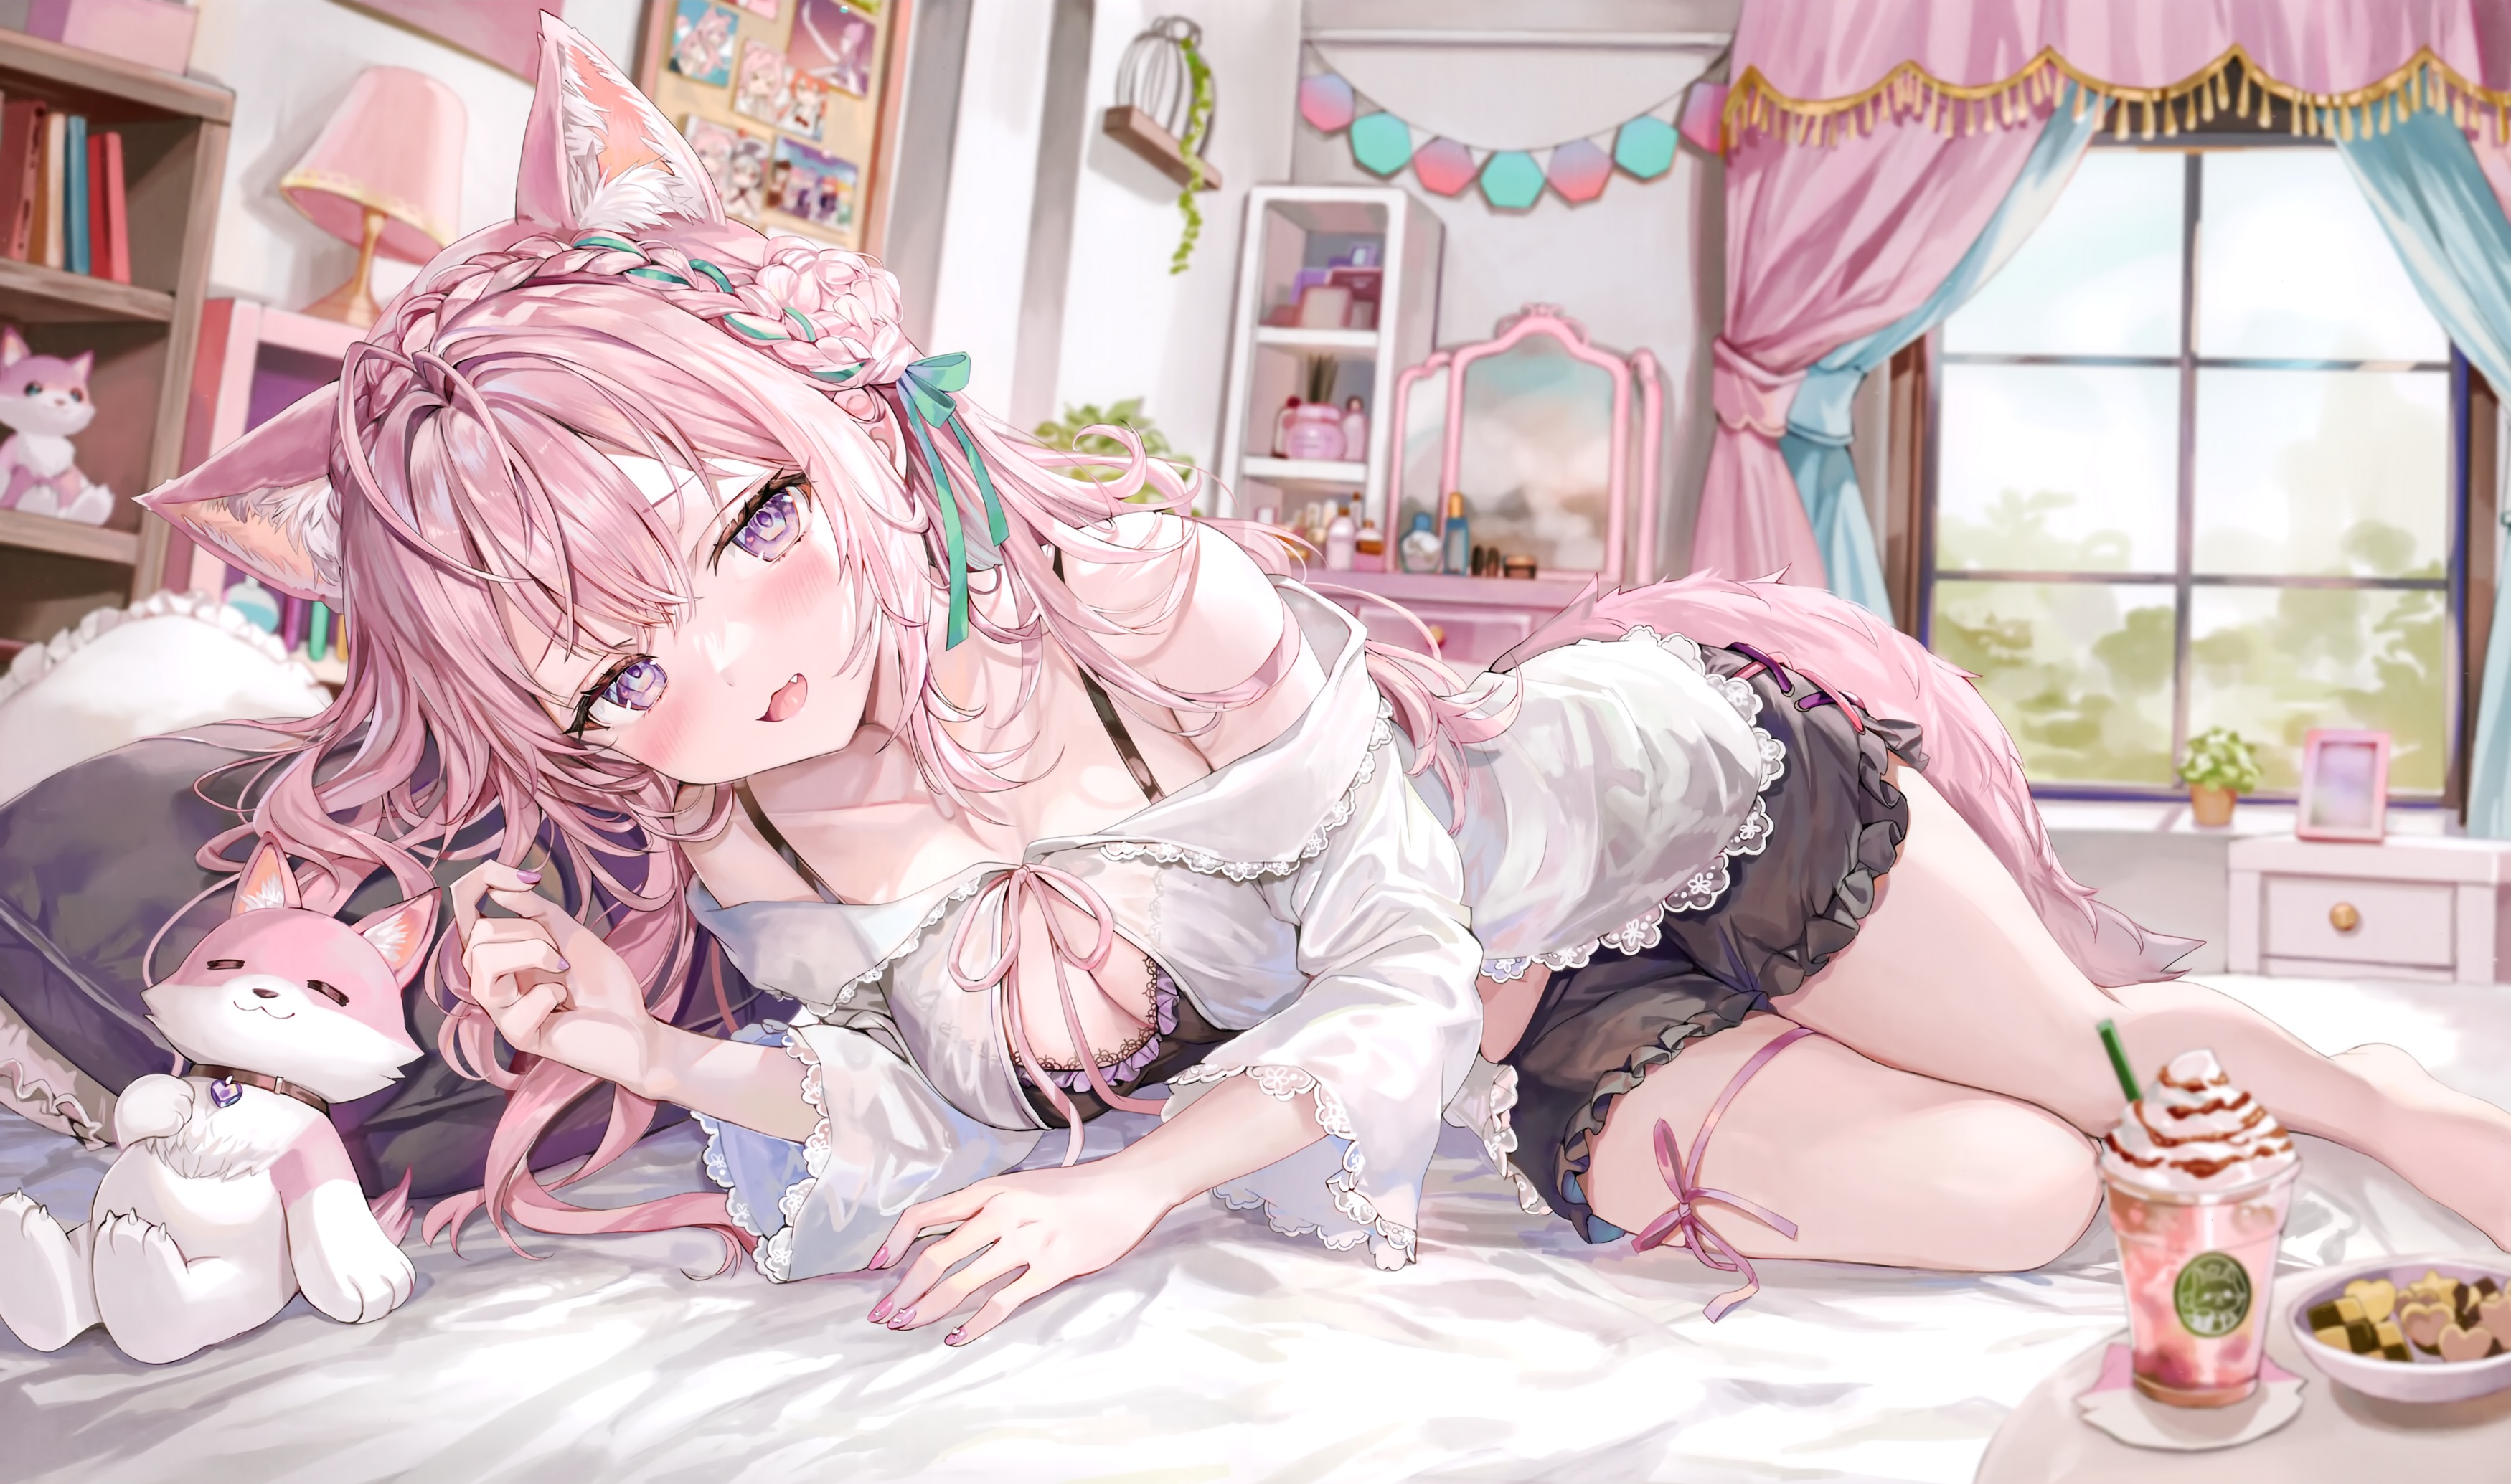 Anime 3500x2069 anime anime girls lying down lying on side Hakui Koyori Hololive Virtual Youtuber cleavage interior room drink cookies blushing looking at viewer long hair pink hair purple eyes pillow bed mirror lamp curtains big boobs lingerie fox girl fox ears fox tail braids animals smiling collar frills in bed indoors women indoors